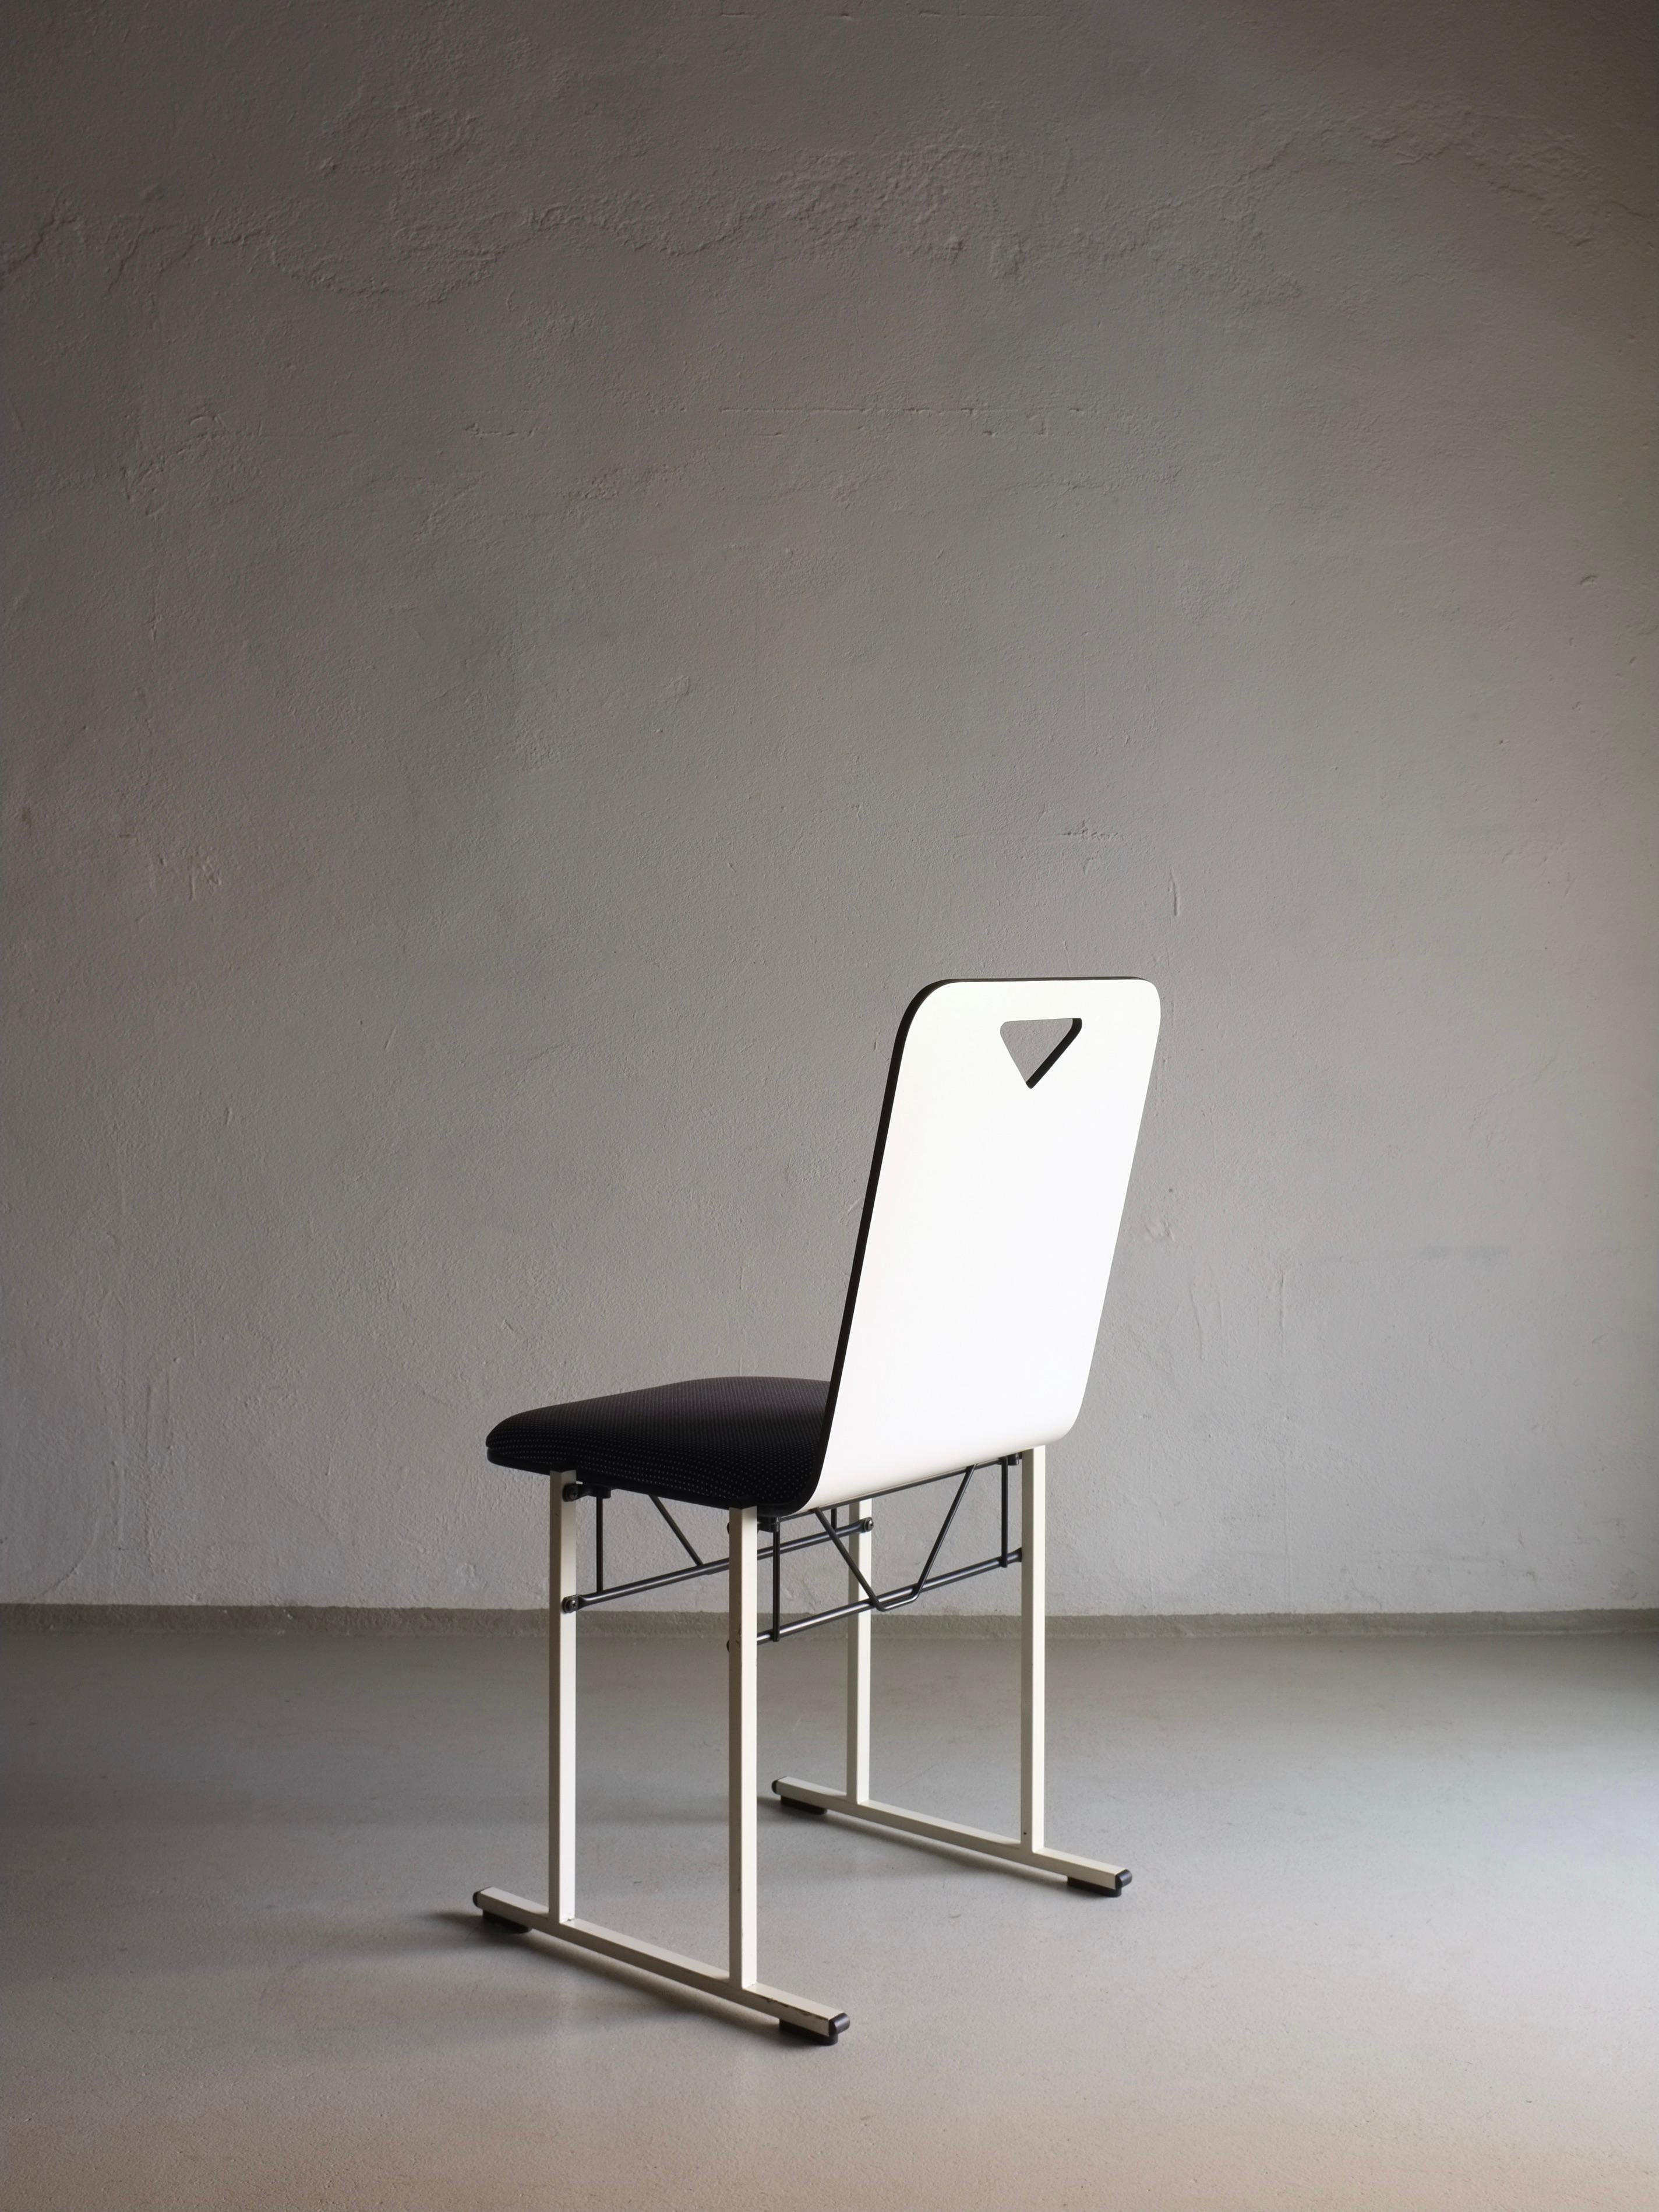 20th Century 4 White Metal Chairs By Yrjö Kukkapuro For Avarte, Finland 1980s For Sale